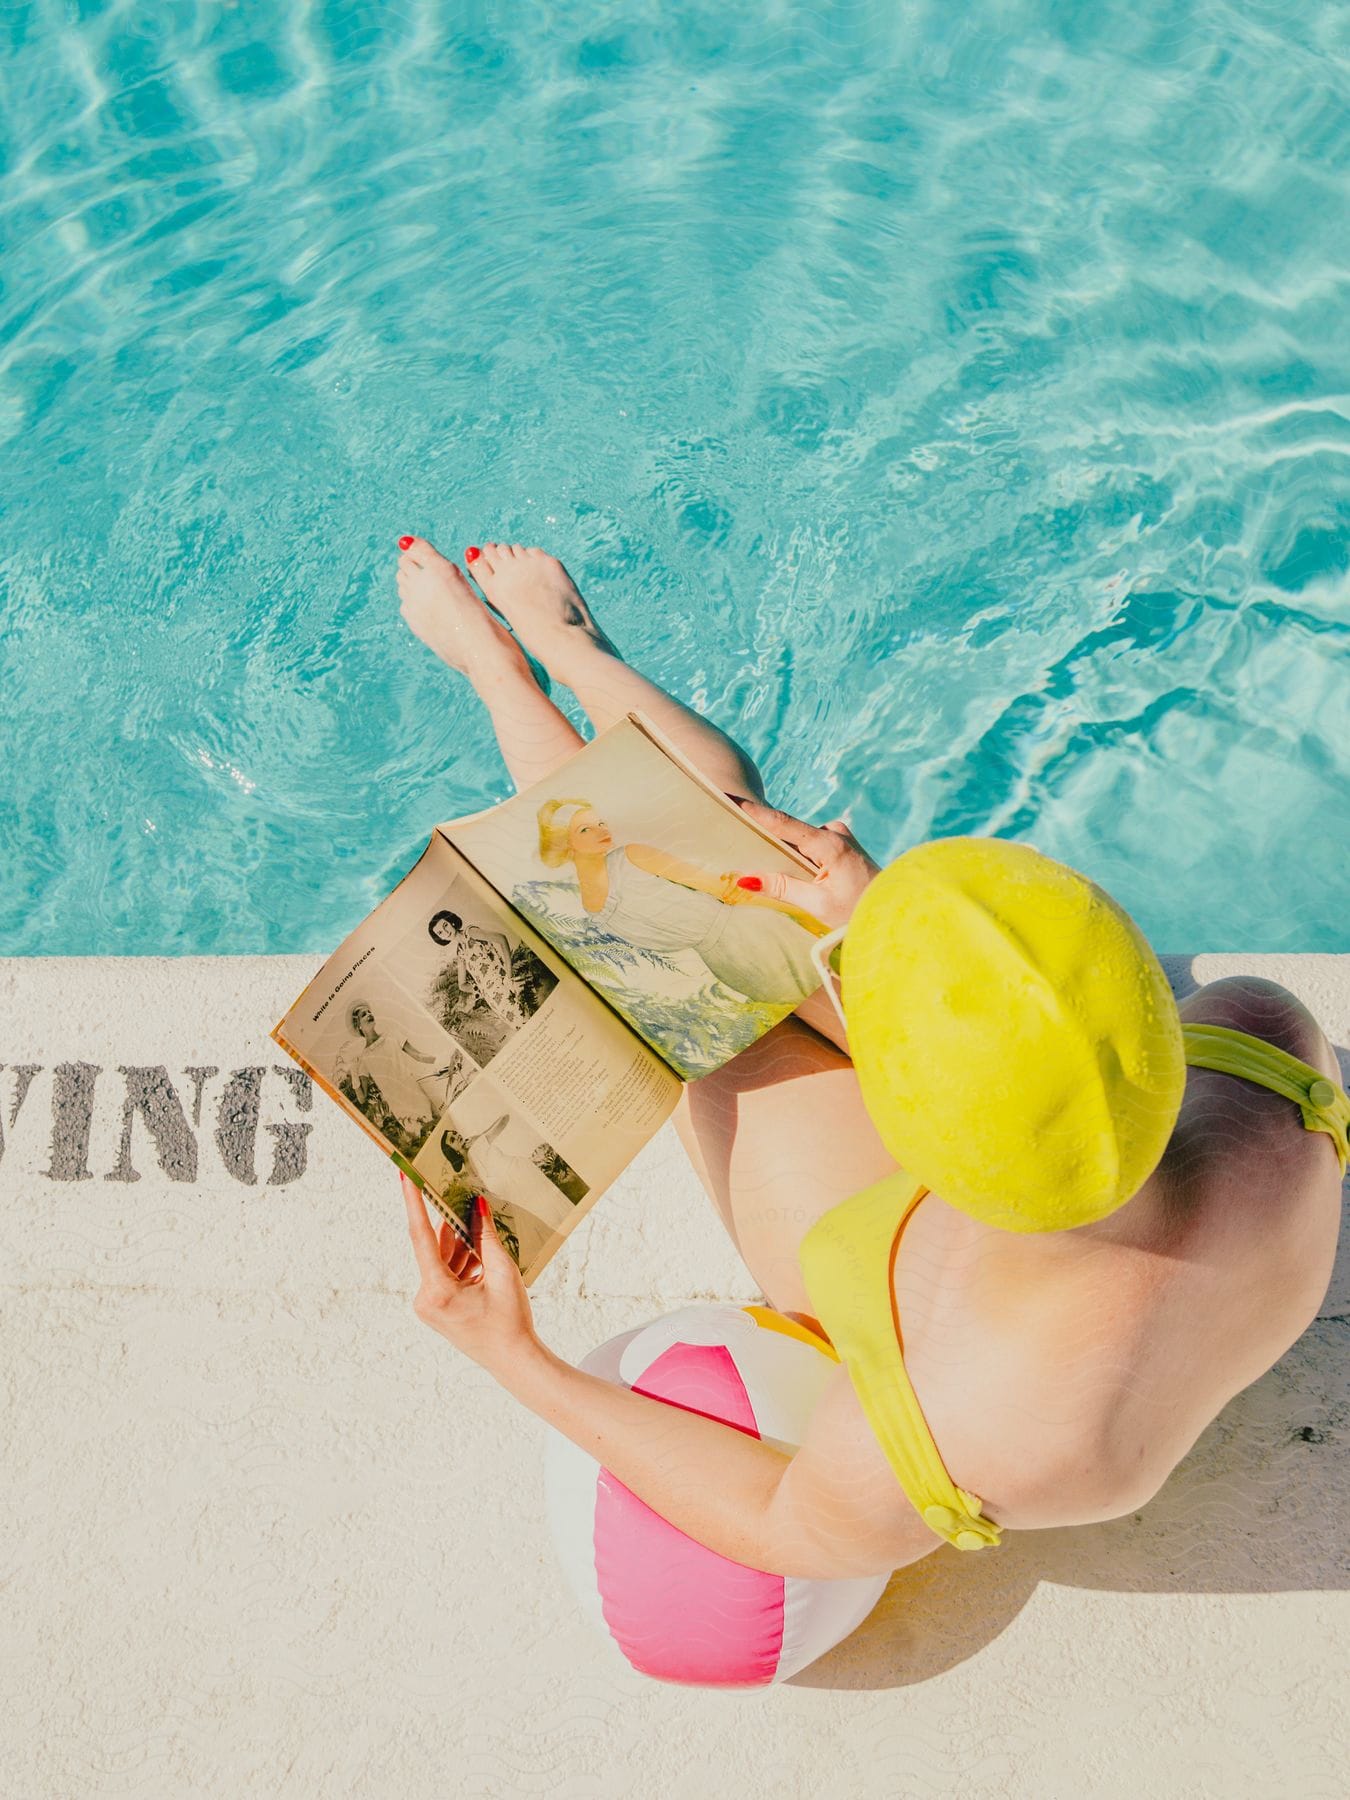 Woman in a swimsuit and yellow cap, sitting by the pool and reading a magazine.